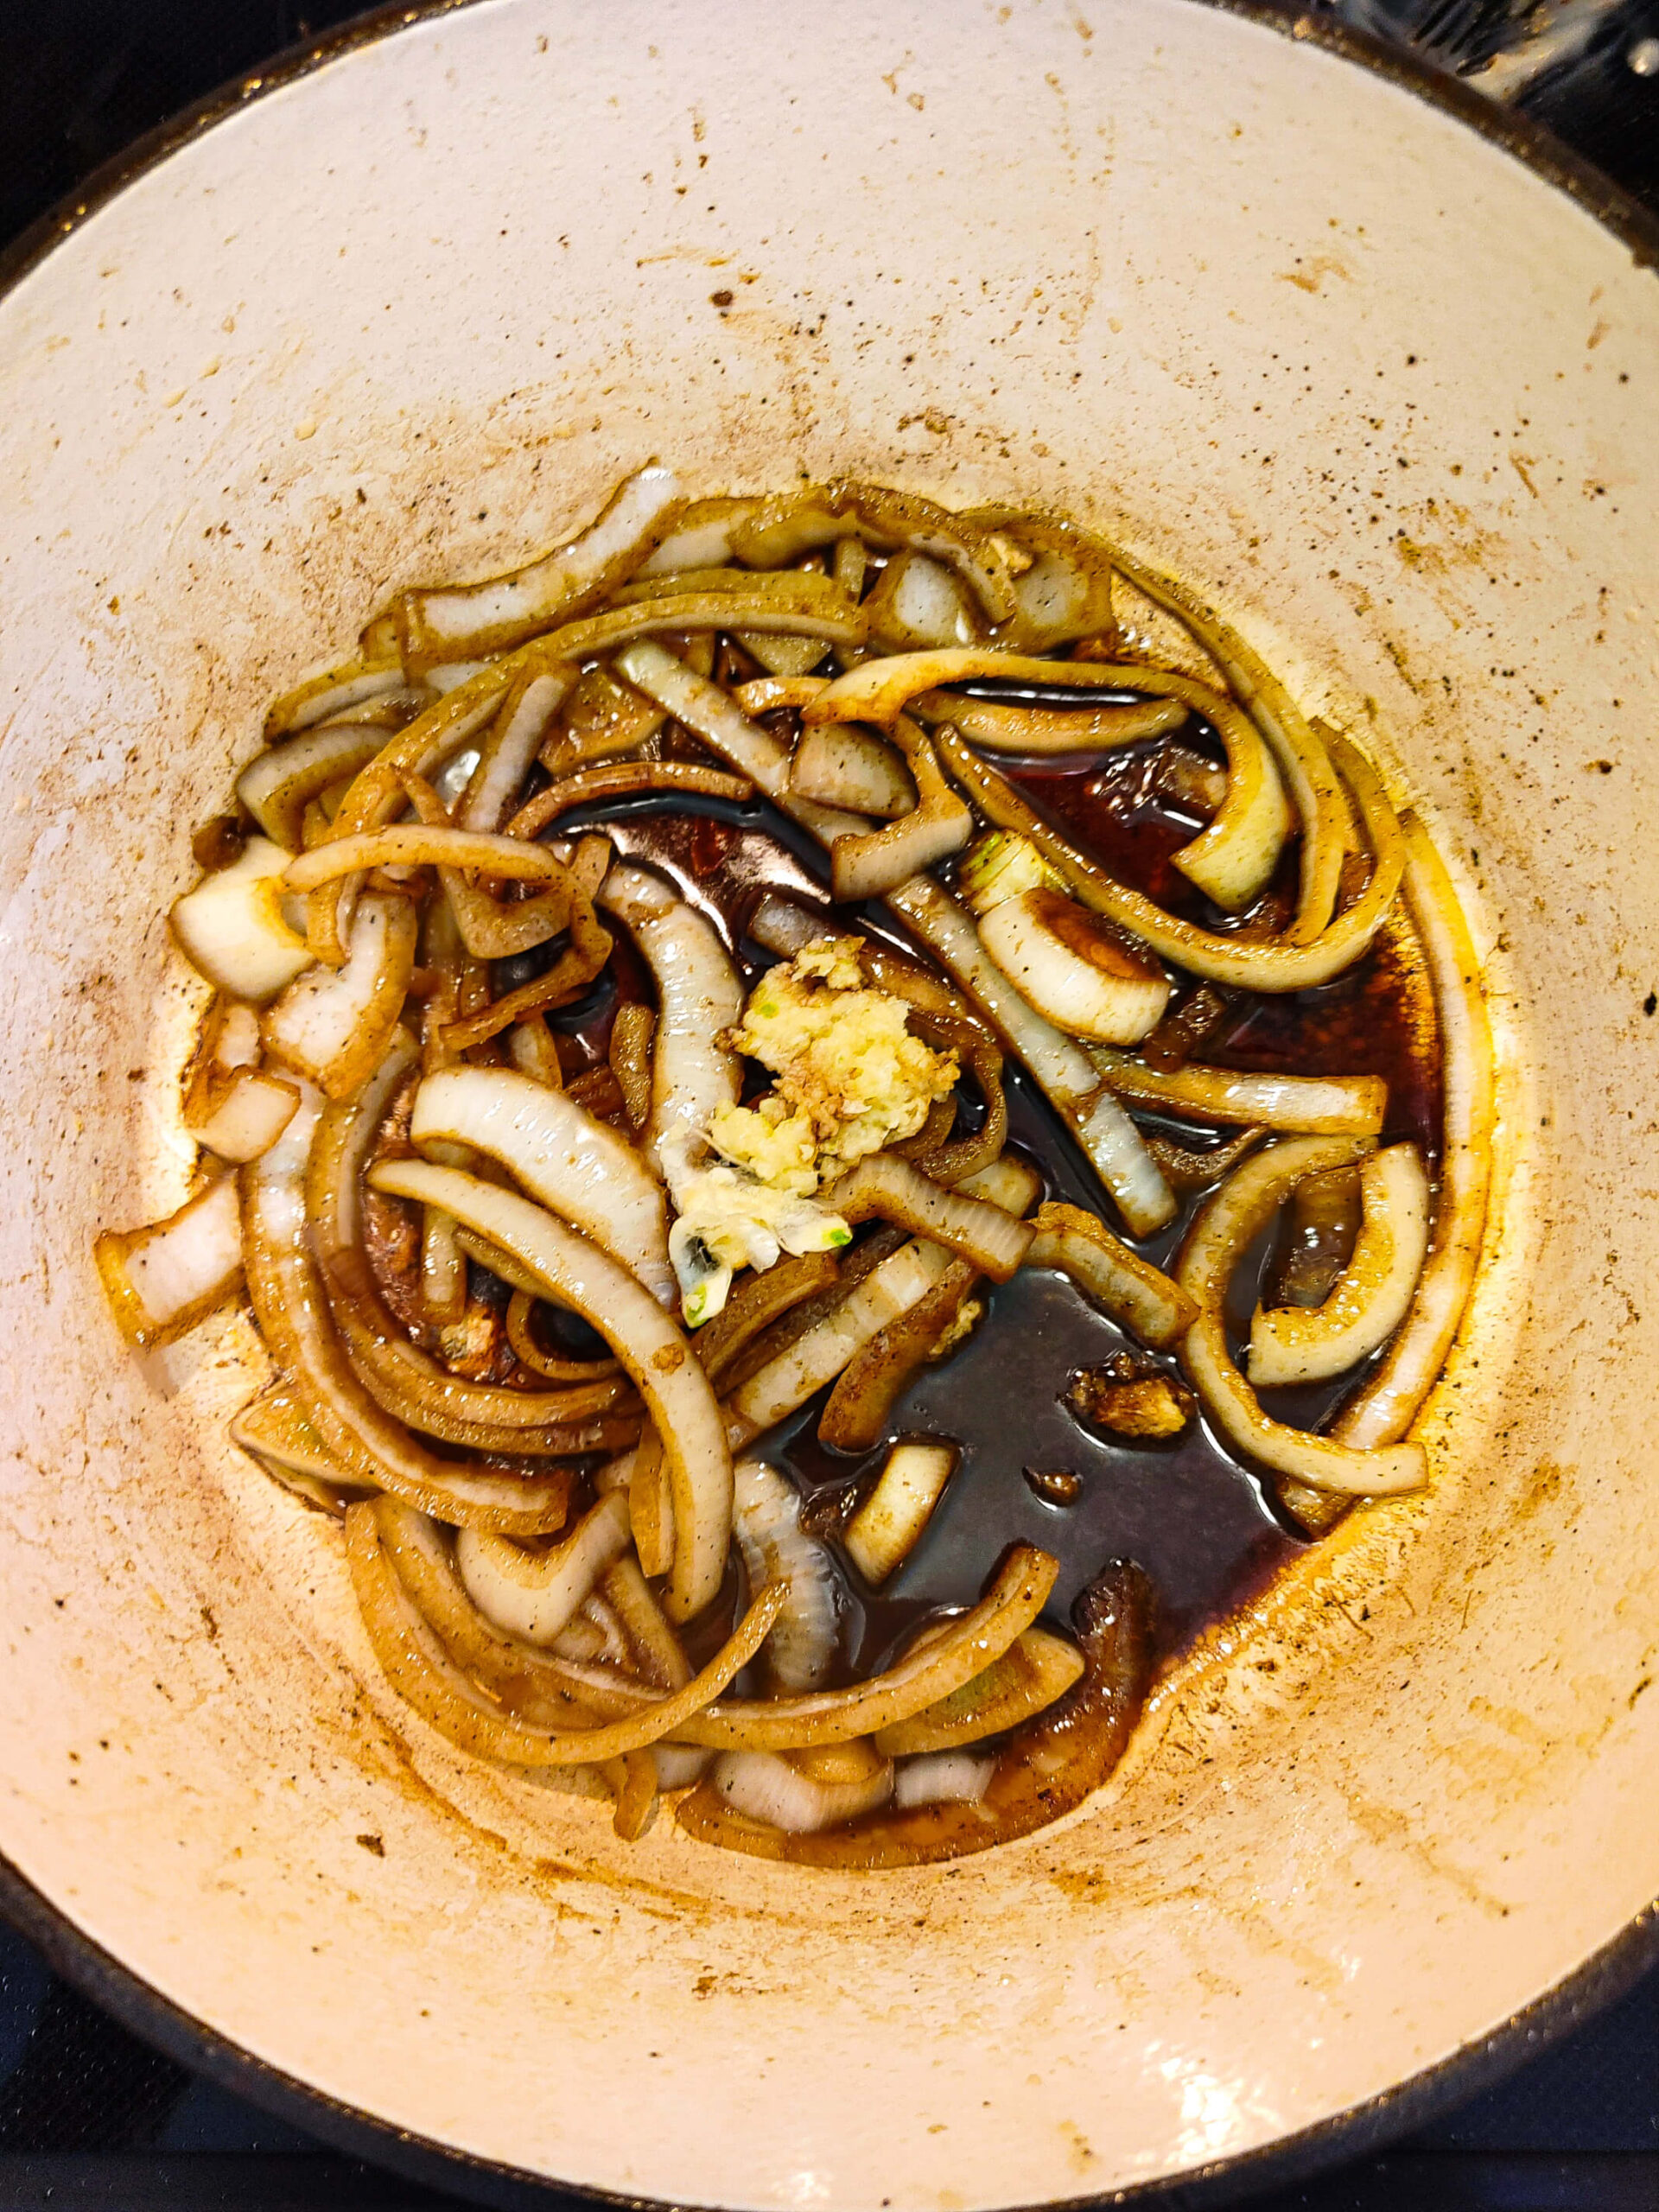 SAUTE THE ONIONS AND GARLIC IN THE SAME SKILLET